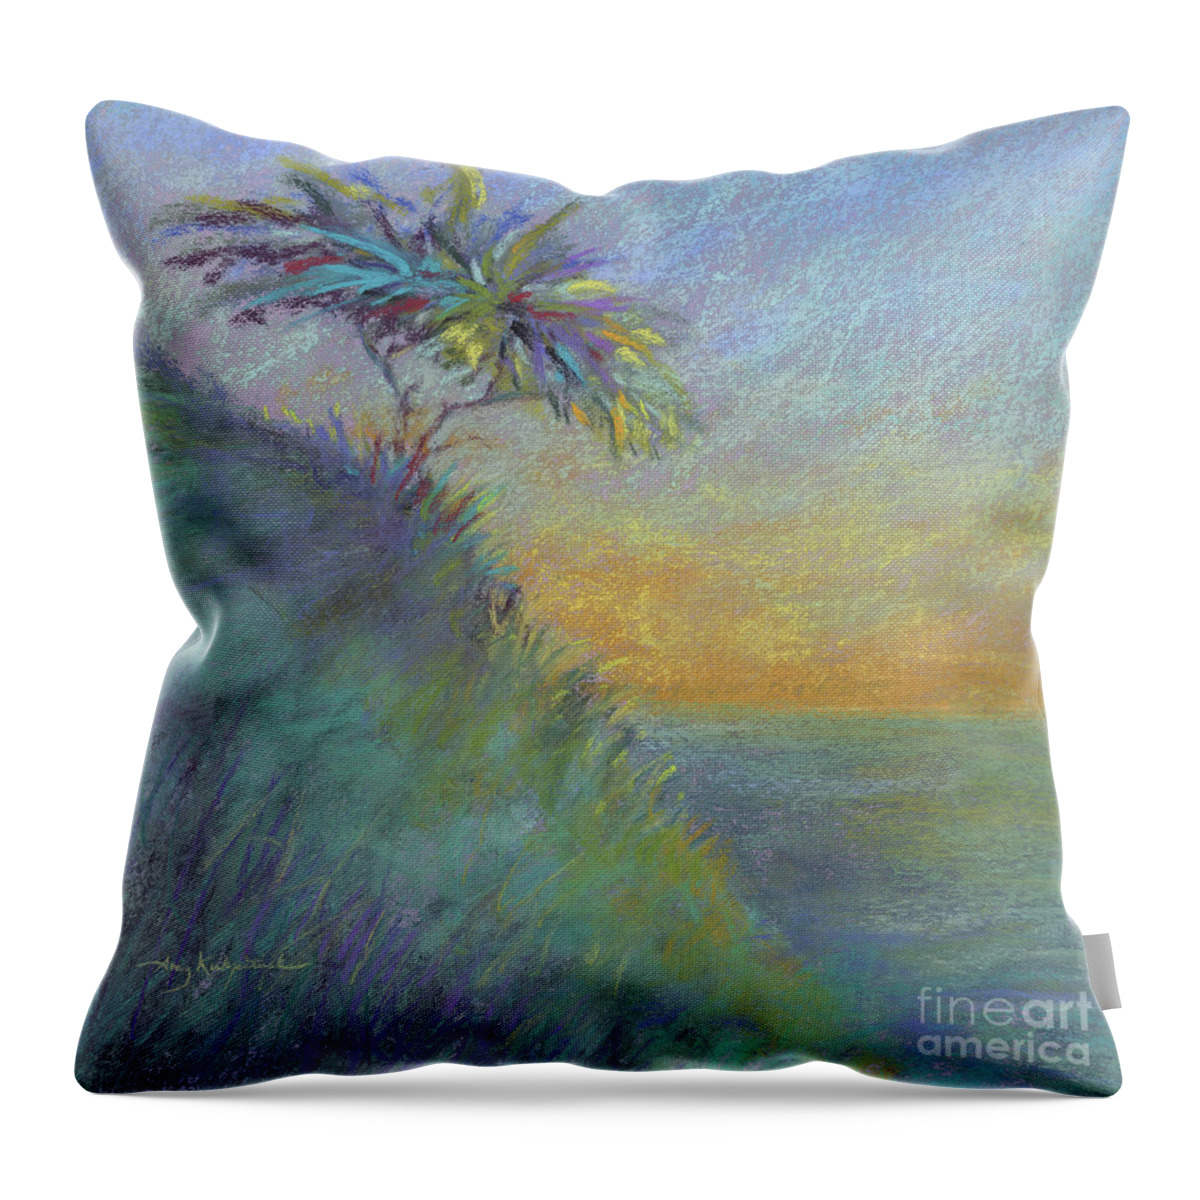 Torrey Pine Throw Pillow featuring the painting Torrey Pine #4 by Amy Kirkpatrick